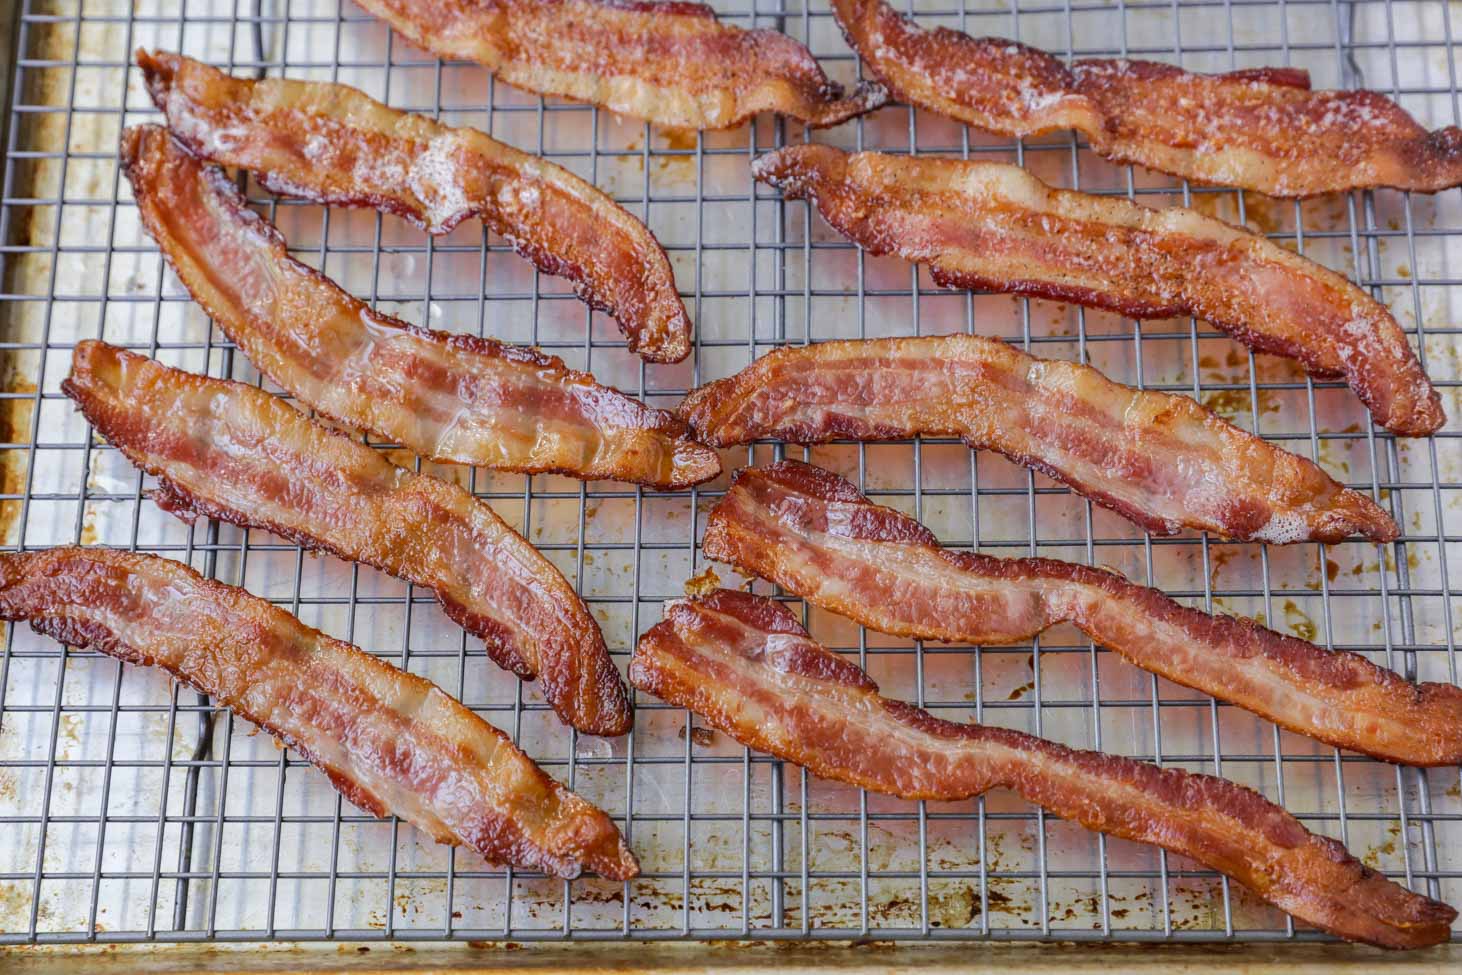 A tray of bacon cooked in the oven.